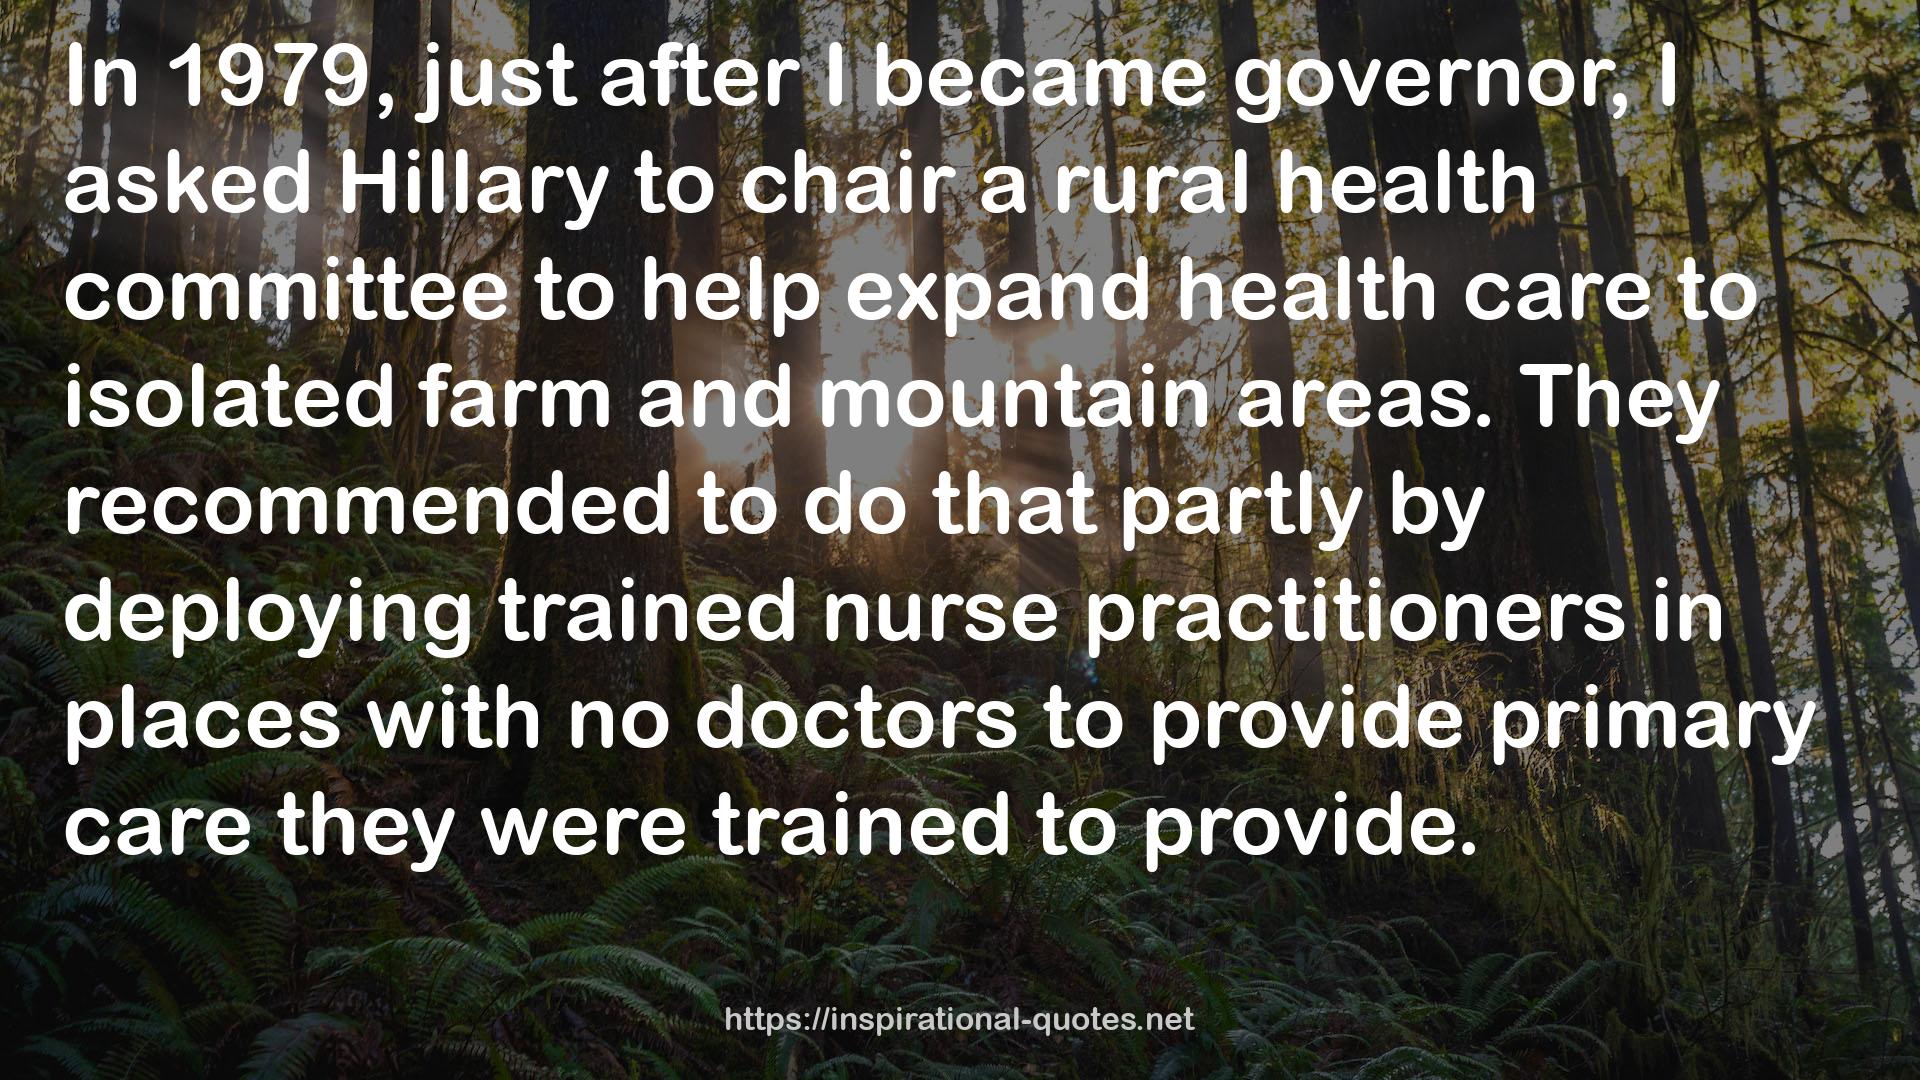 a rural health committee  QUOTES